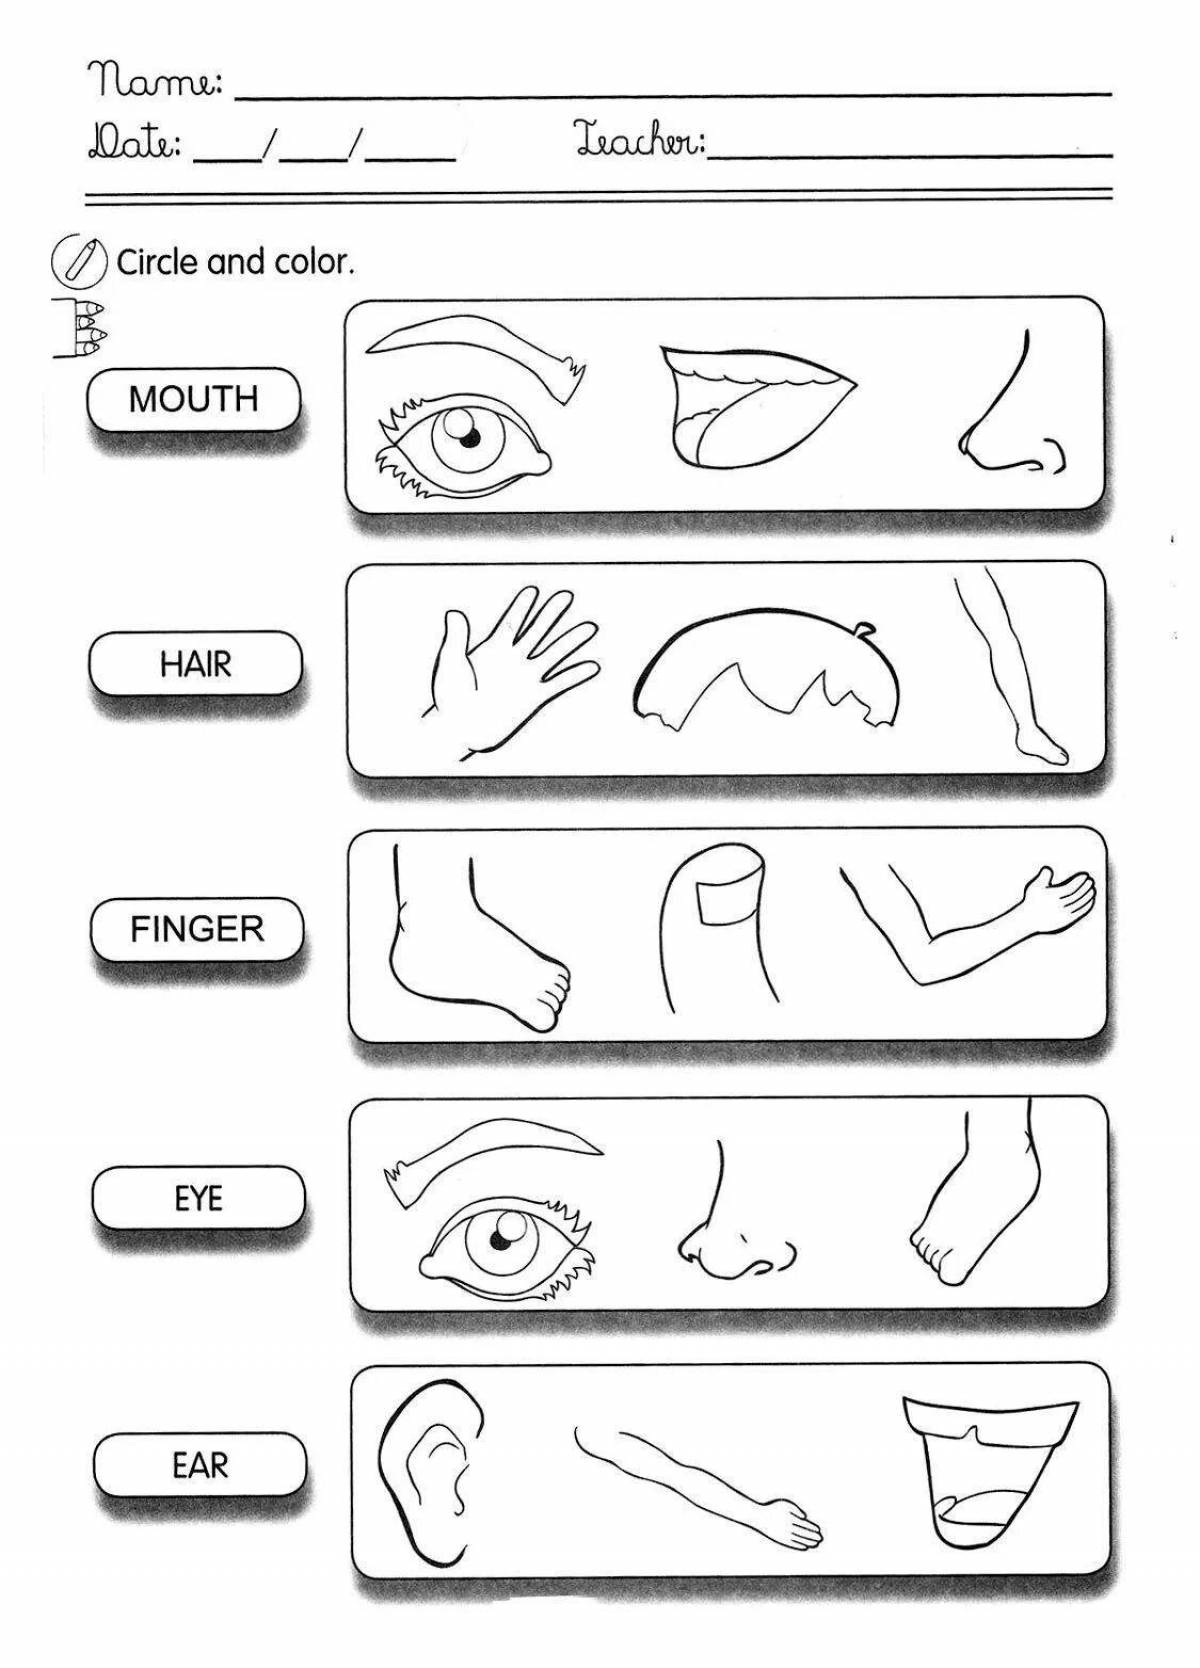 Body parts in english for kids #6